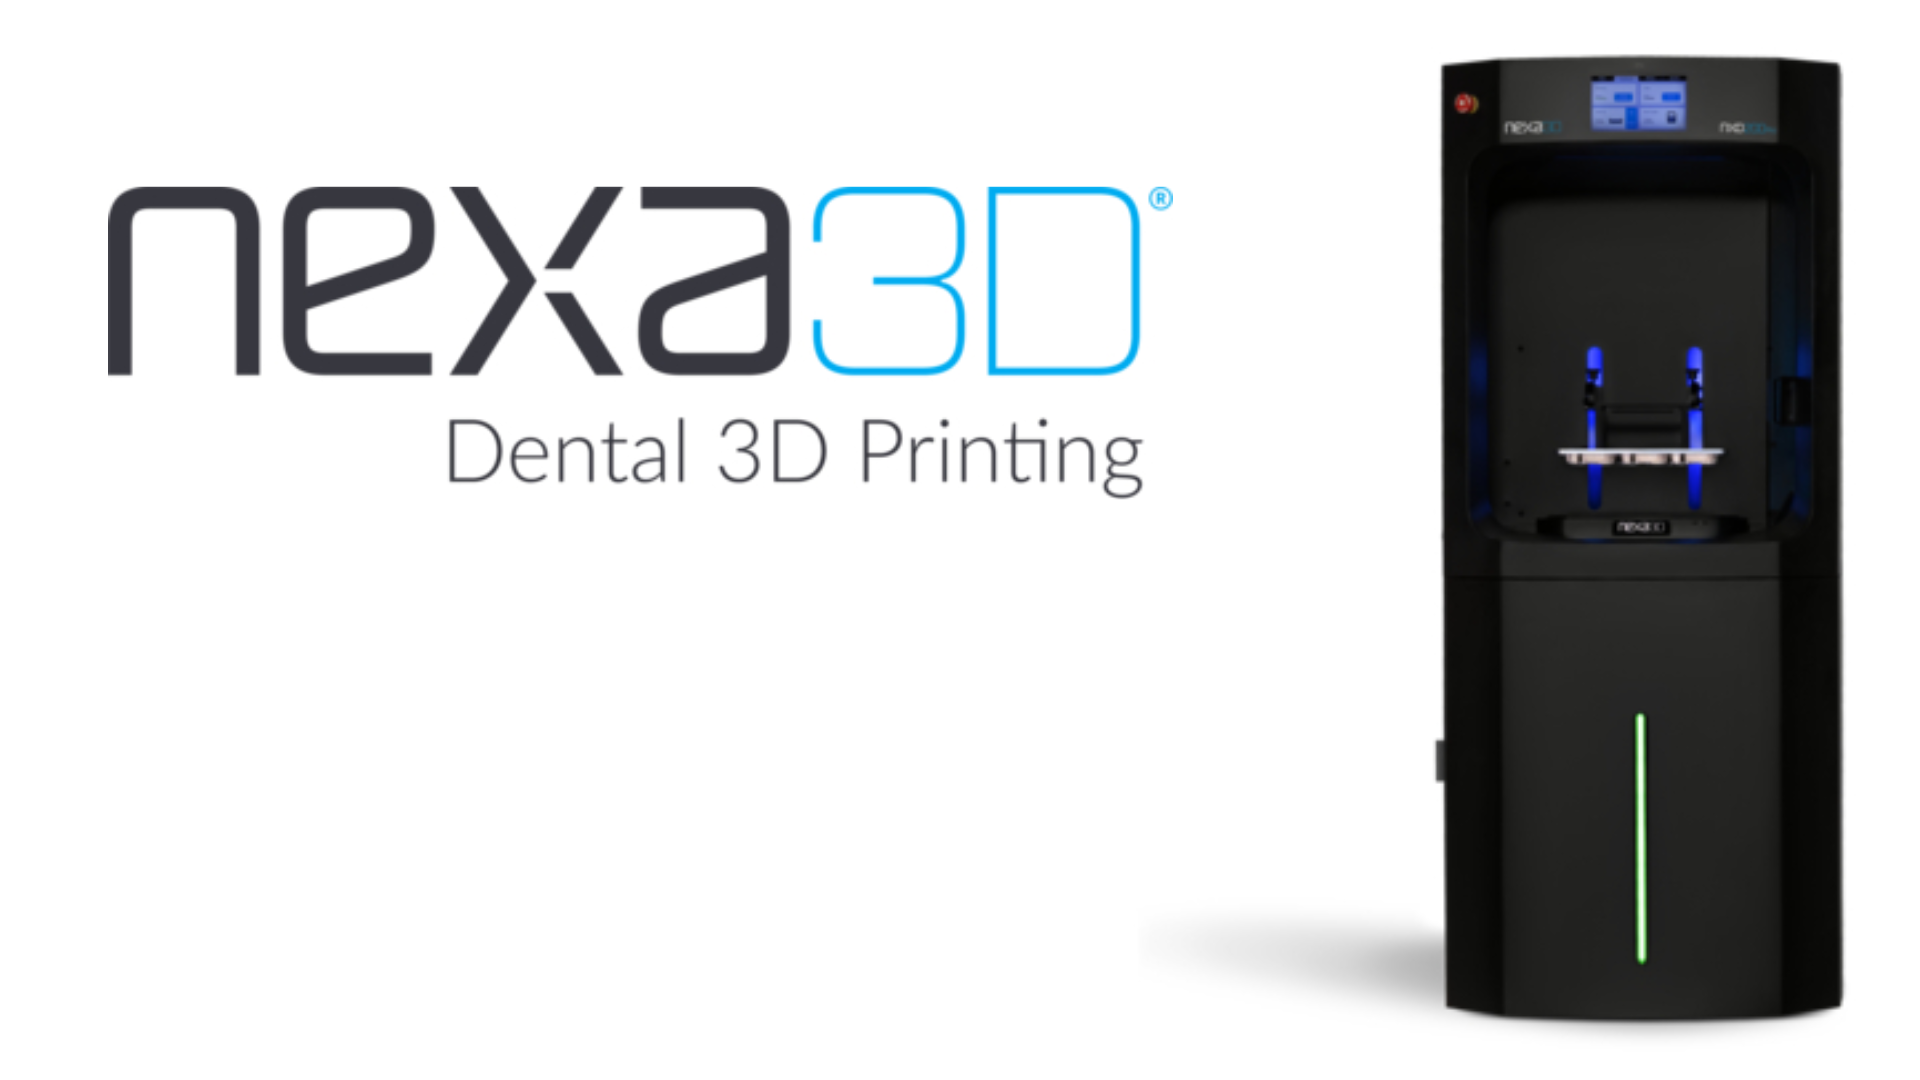 Nexa3D announced the immediate availability of its new Professional Series upgrade for its NXD 200 dental 3D printer based on LSPc™ technology.